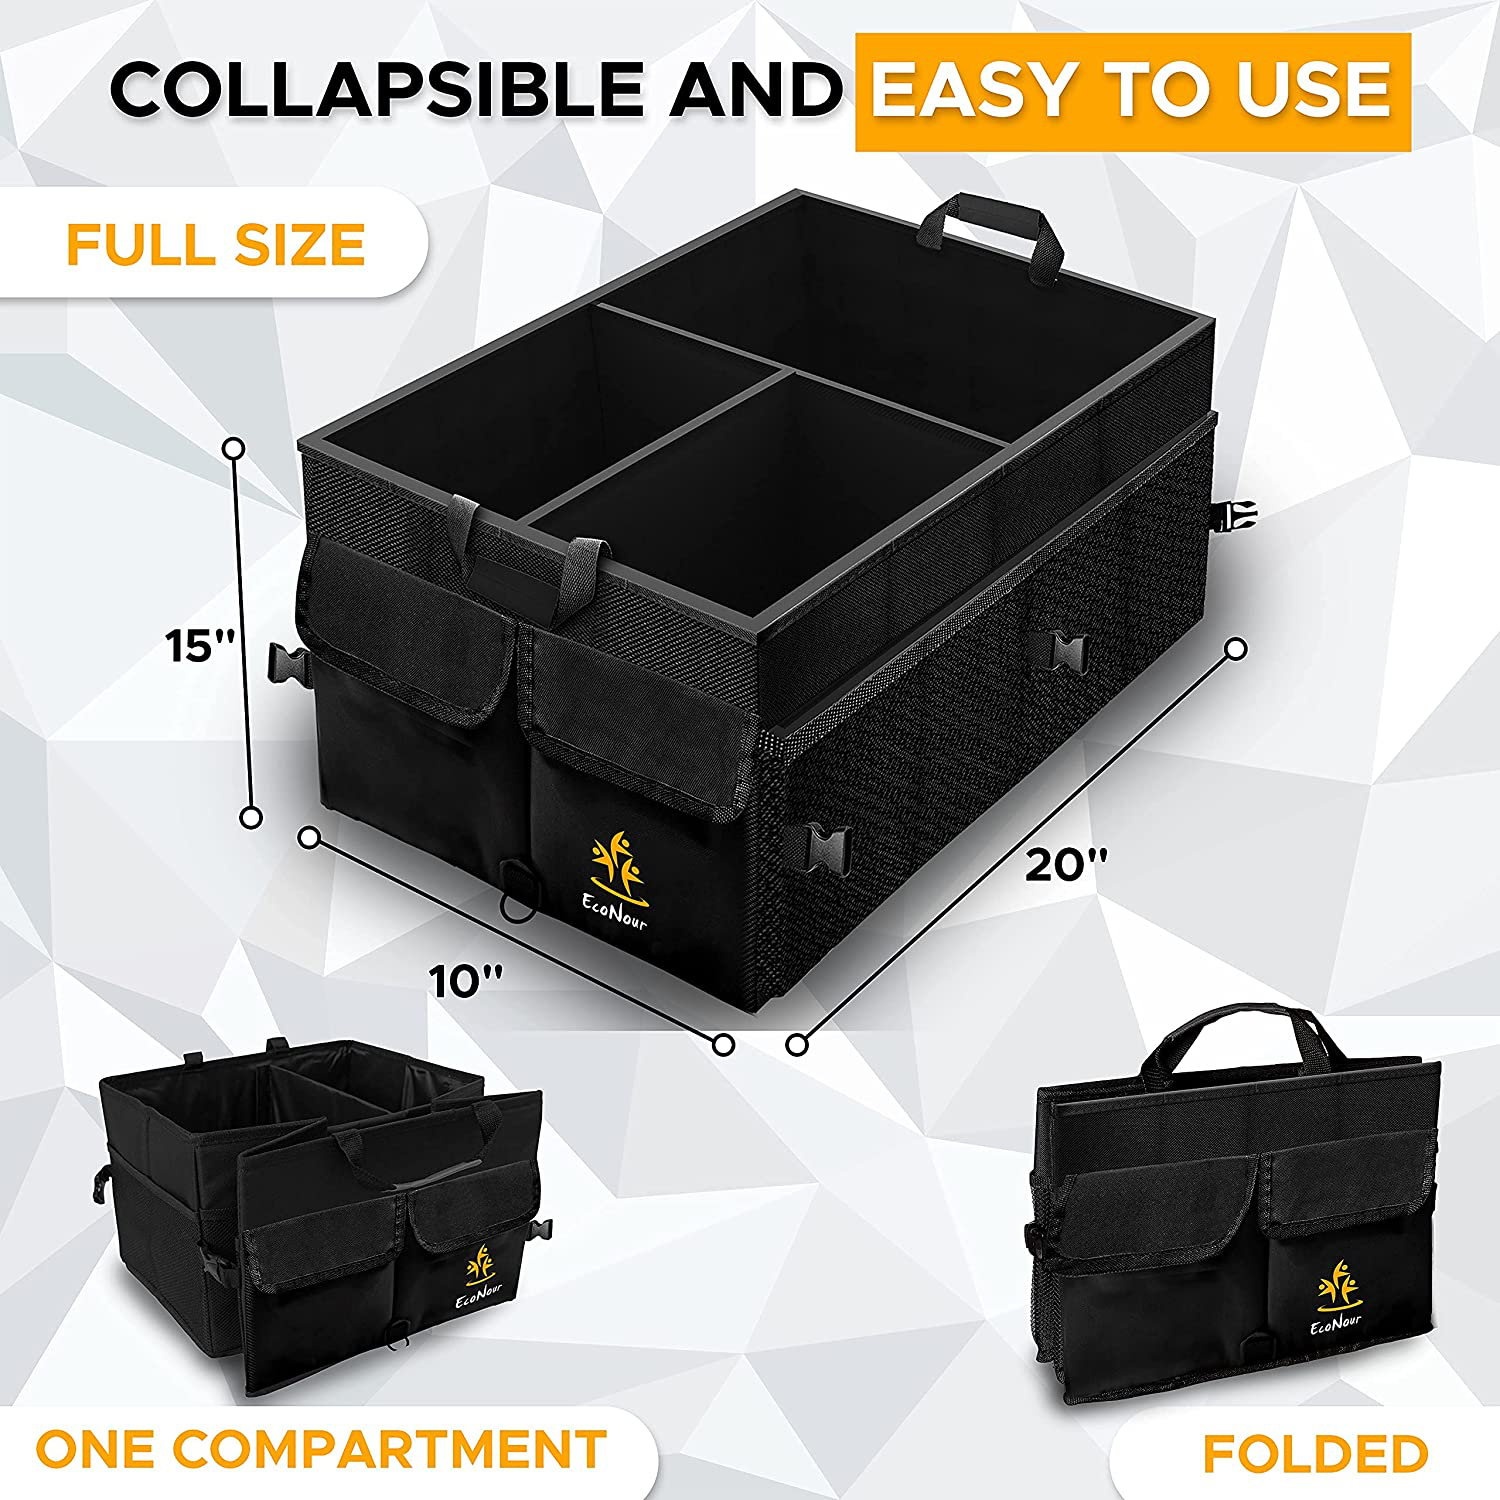 EcoNour Trunk Organizer with Detachable Dividers | Tough and Sturdy Trunk Organizers and Storage SUV with Straps | Foldable Automotive Consoles & Organizers with Non-Slip Bottom & Multiple Lid Pockets